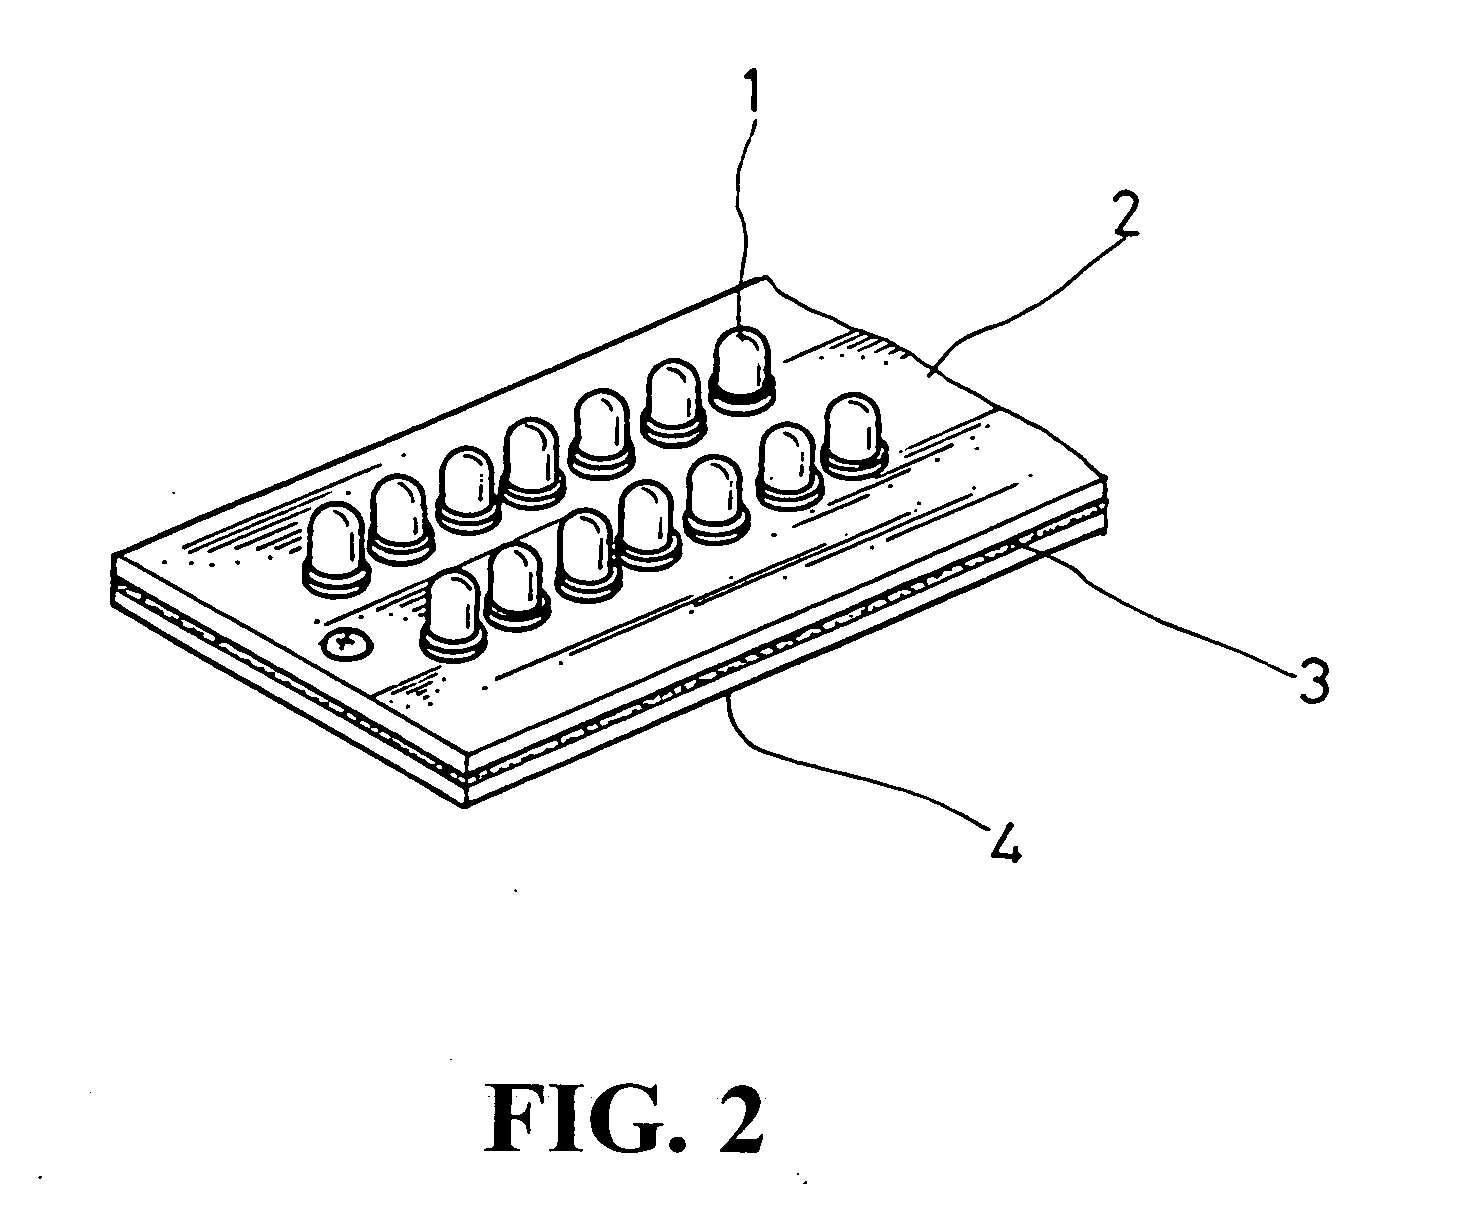 High-power LED lamp having heat dissipation assembly